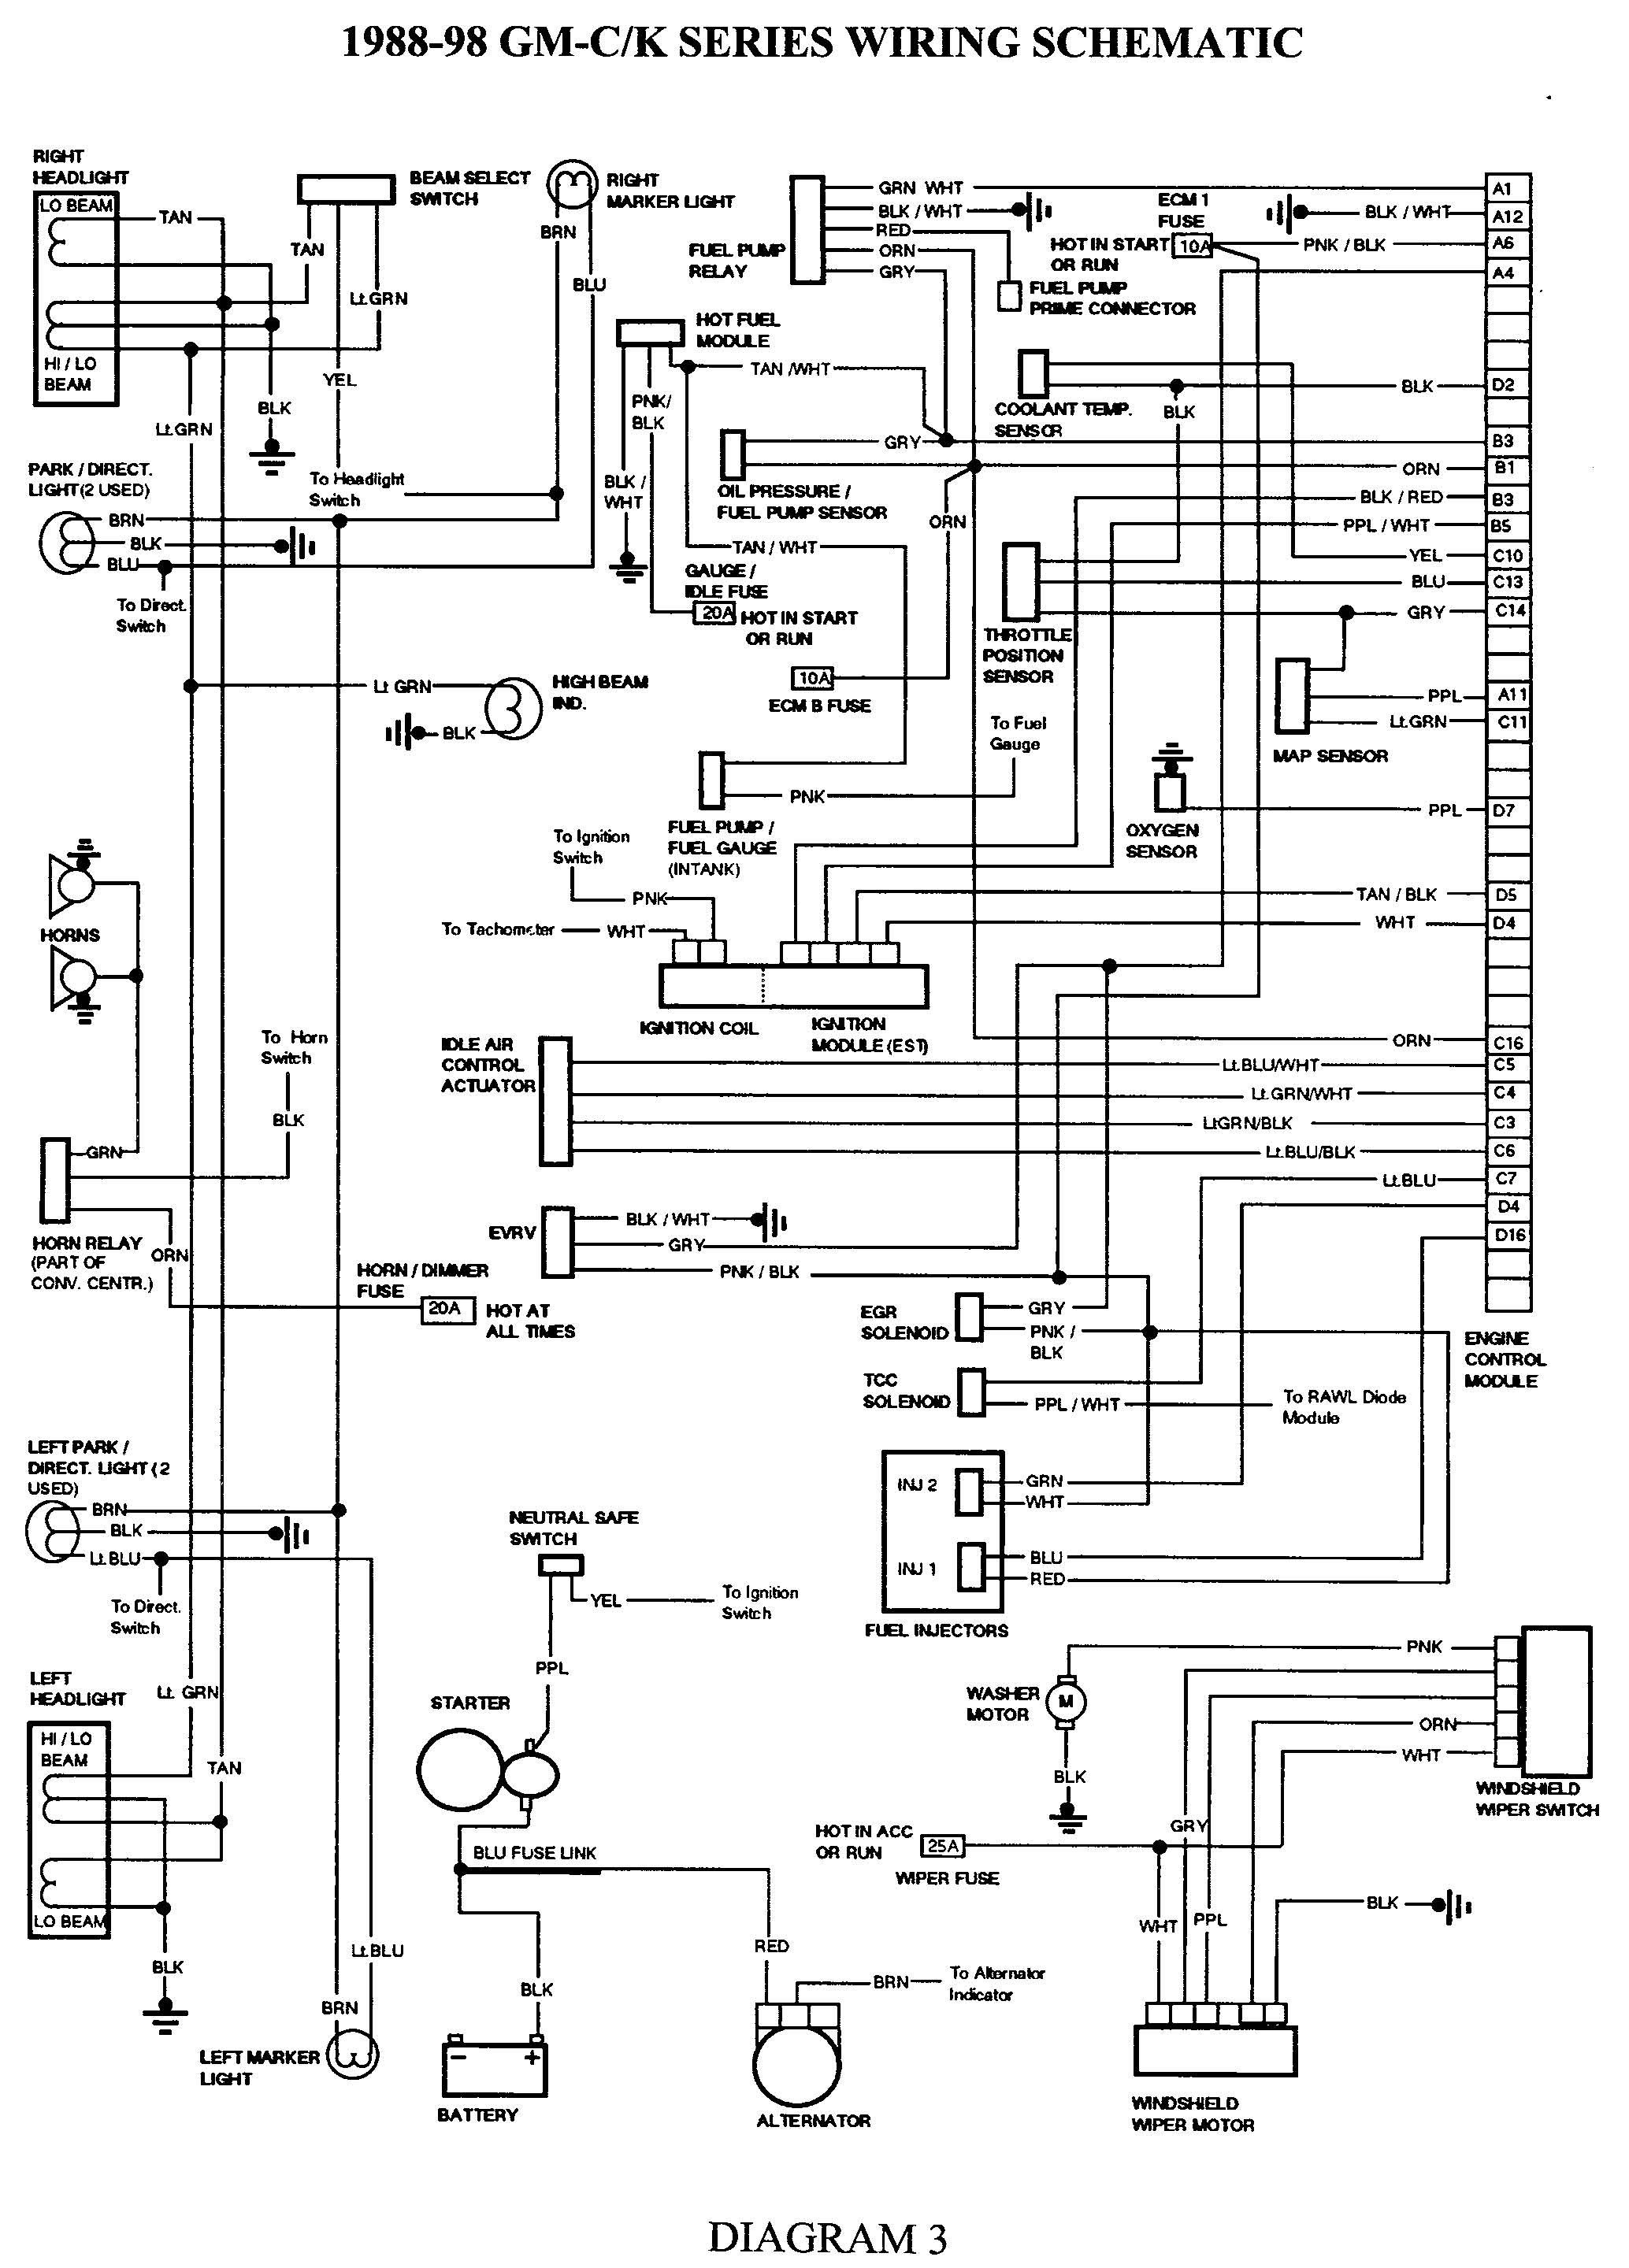 Wiring Diagram for 350 Chevy Engine Chevy 350 Wiring Of Wiring Diagram for 350 Chevy Engine